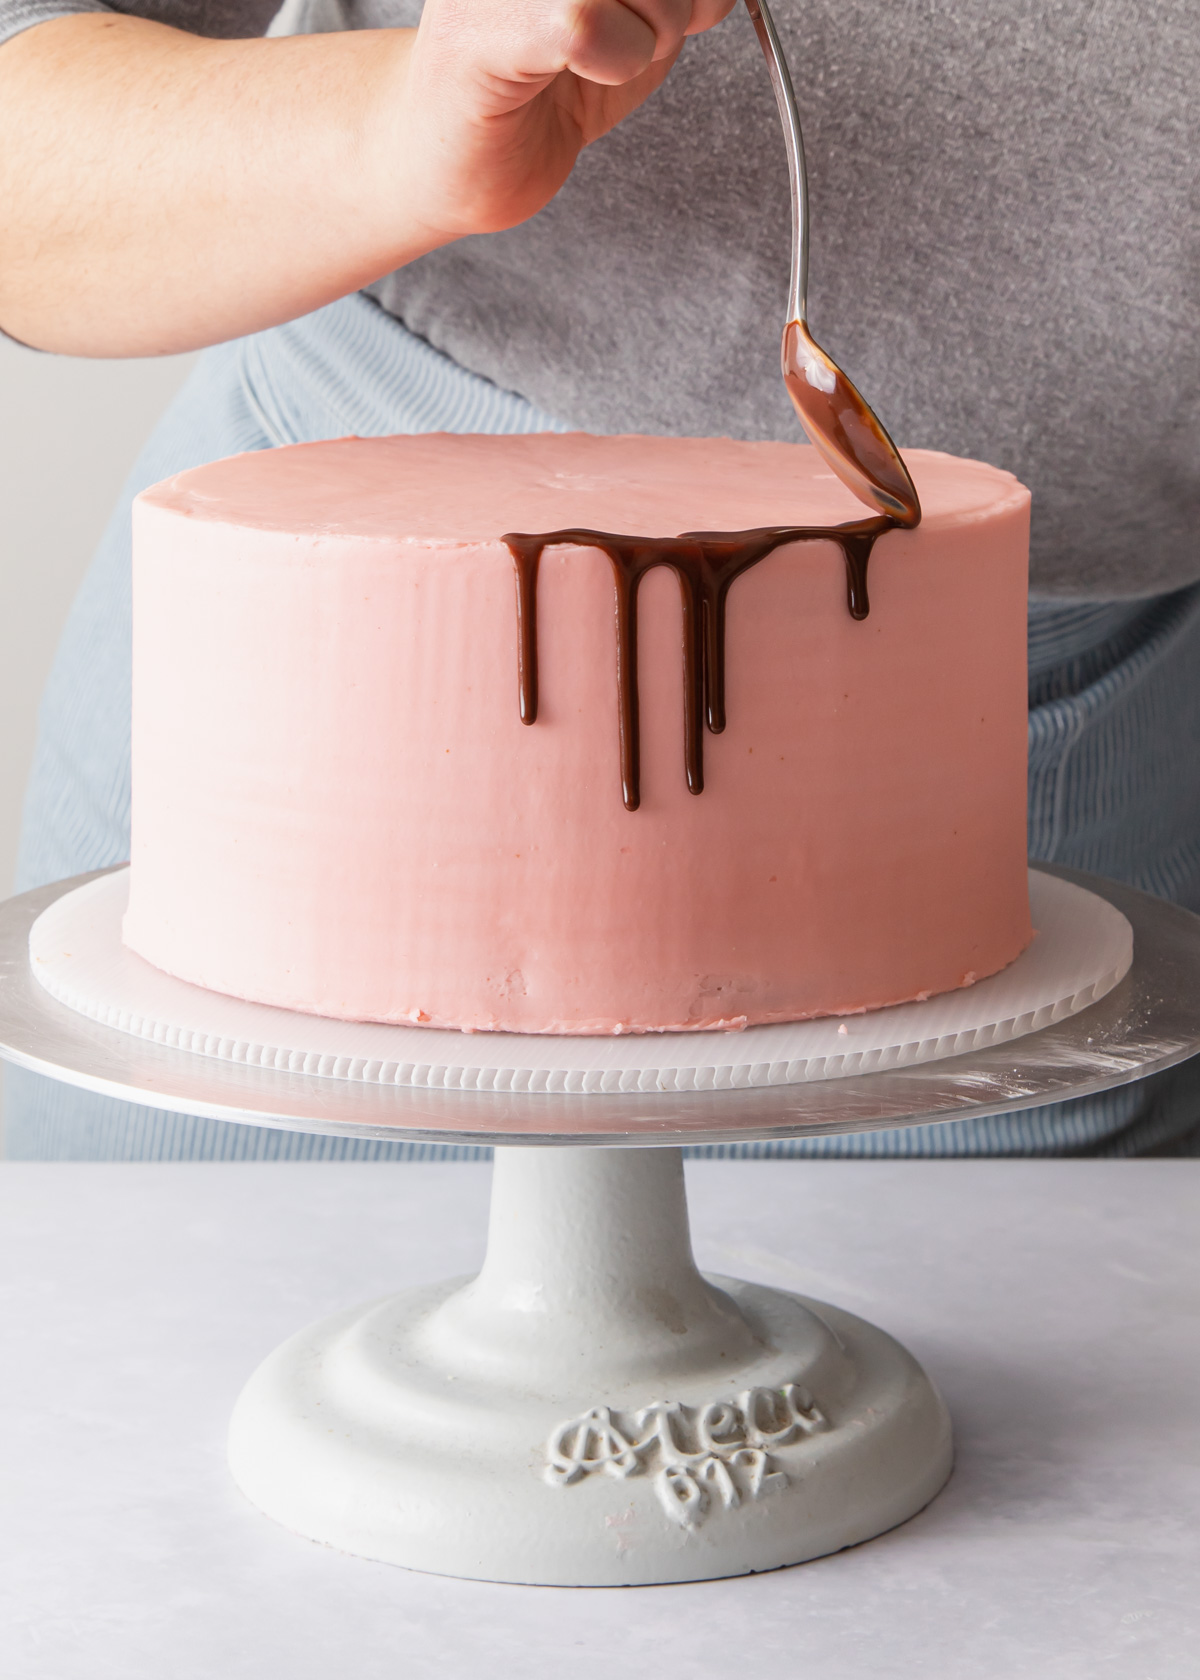 Dripping chocolate glaze on a pink cake with a spoon